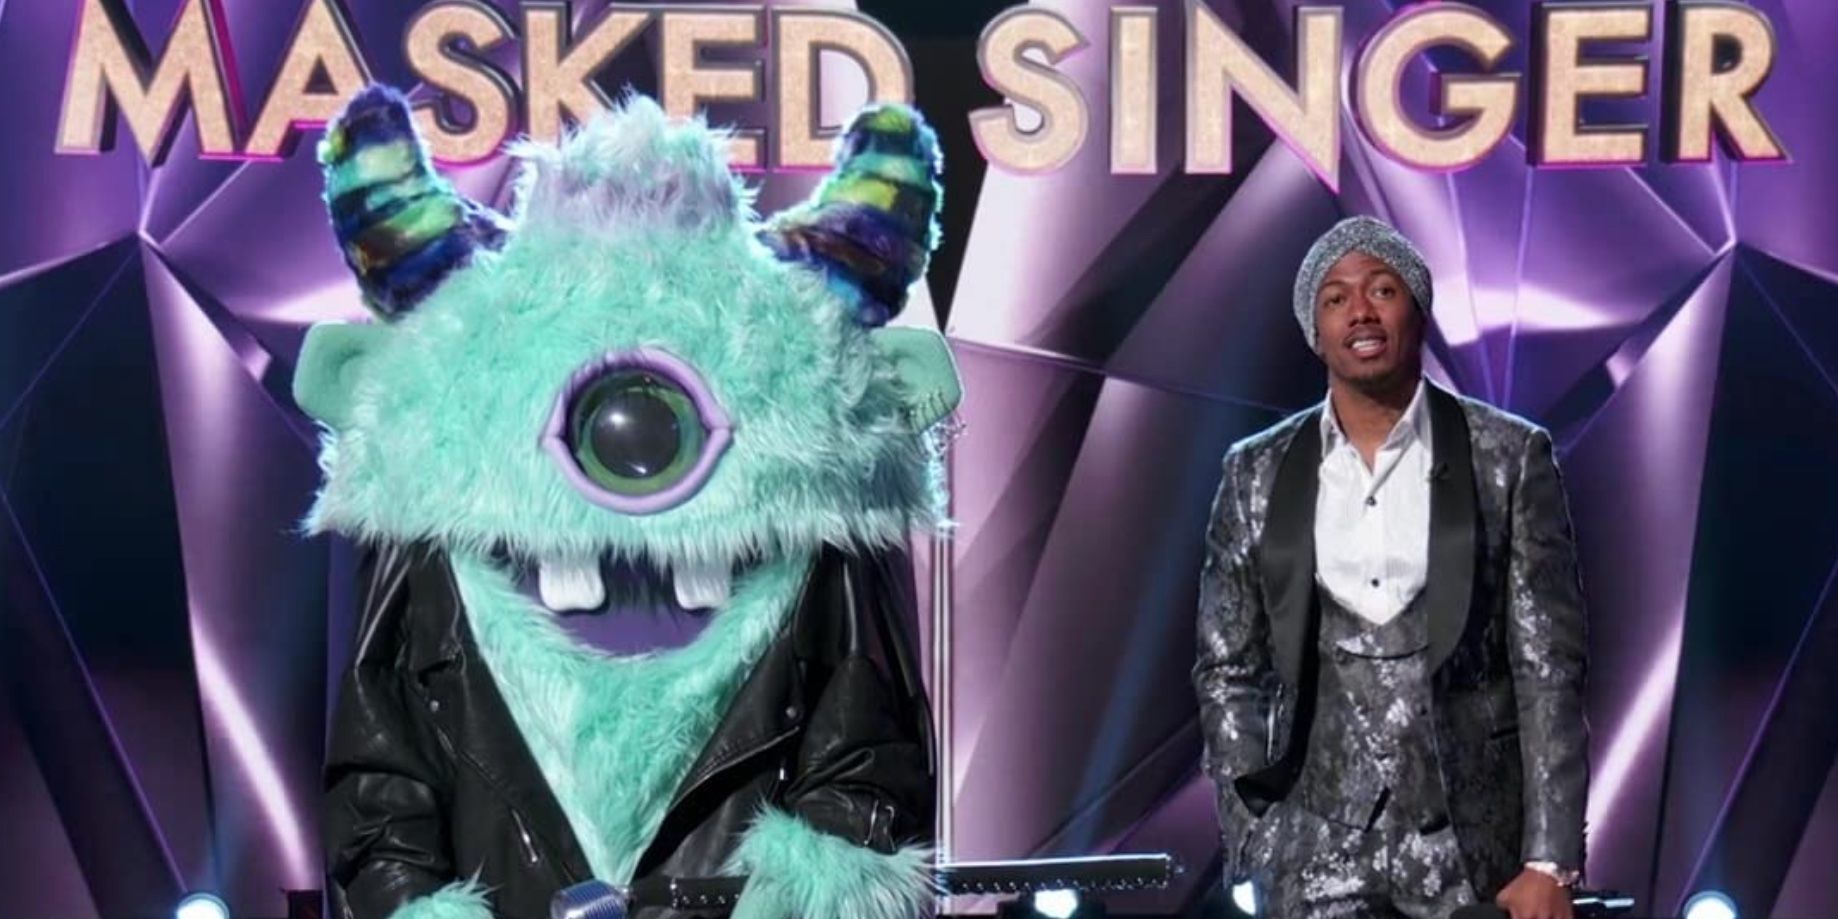 Nick Cannon and T-Pain (wearing a monster costume) in 'The Masked Singer'